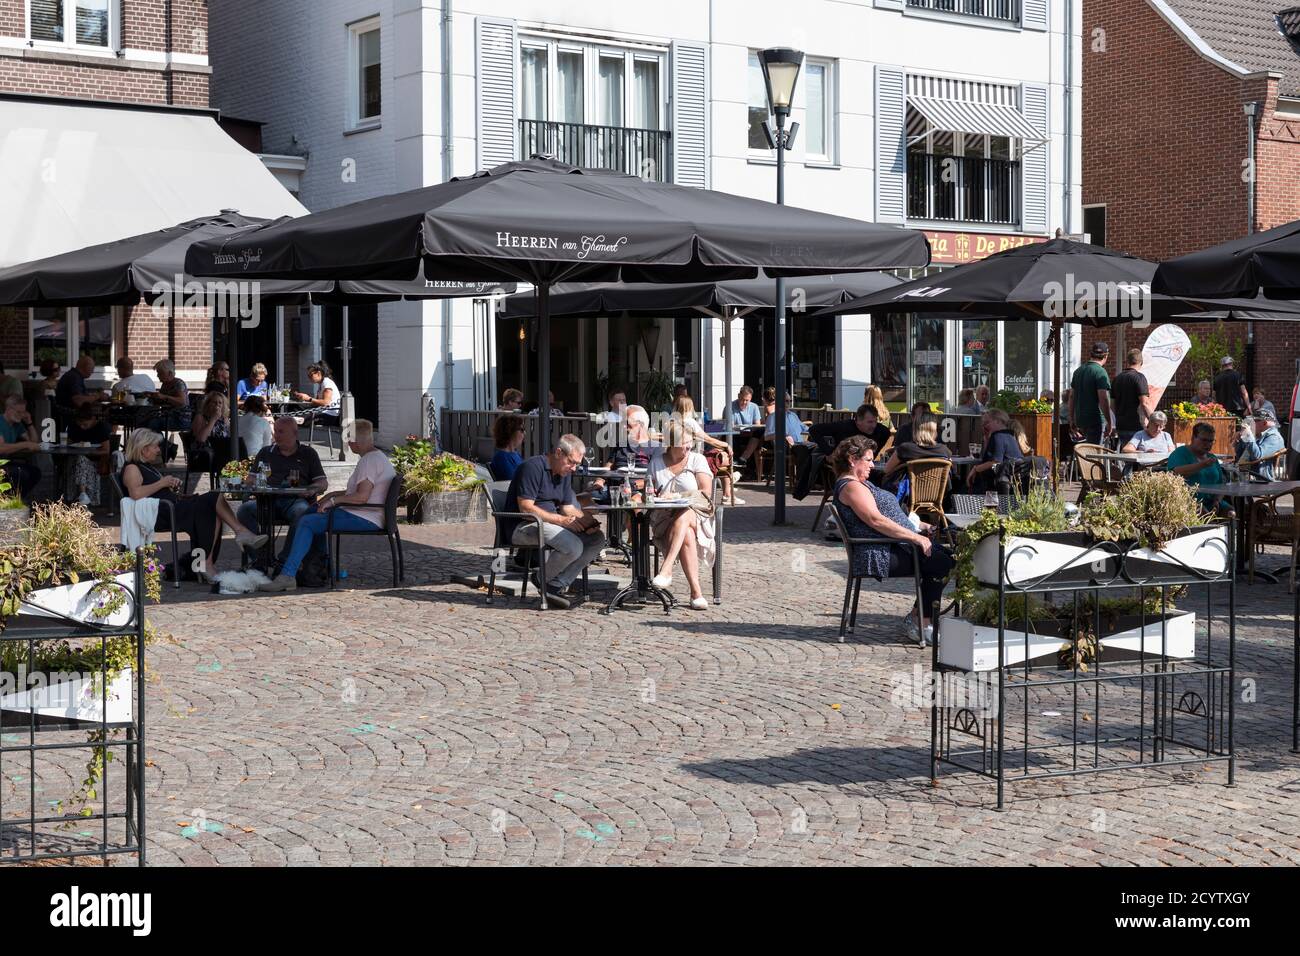 Gemert,Netherlands,13-sep-2020: People enjoy drinks on a cafe terrace on the Grote Markt square in the center of Gemert Stock Photo